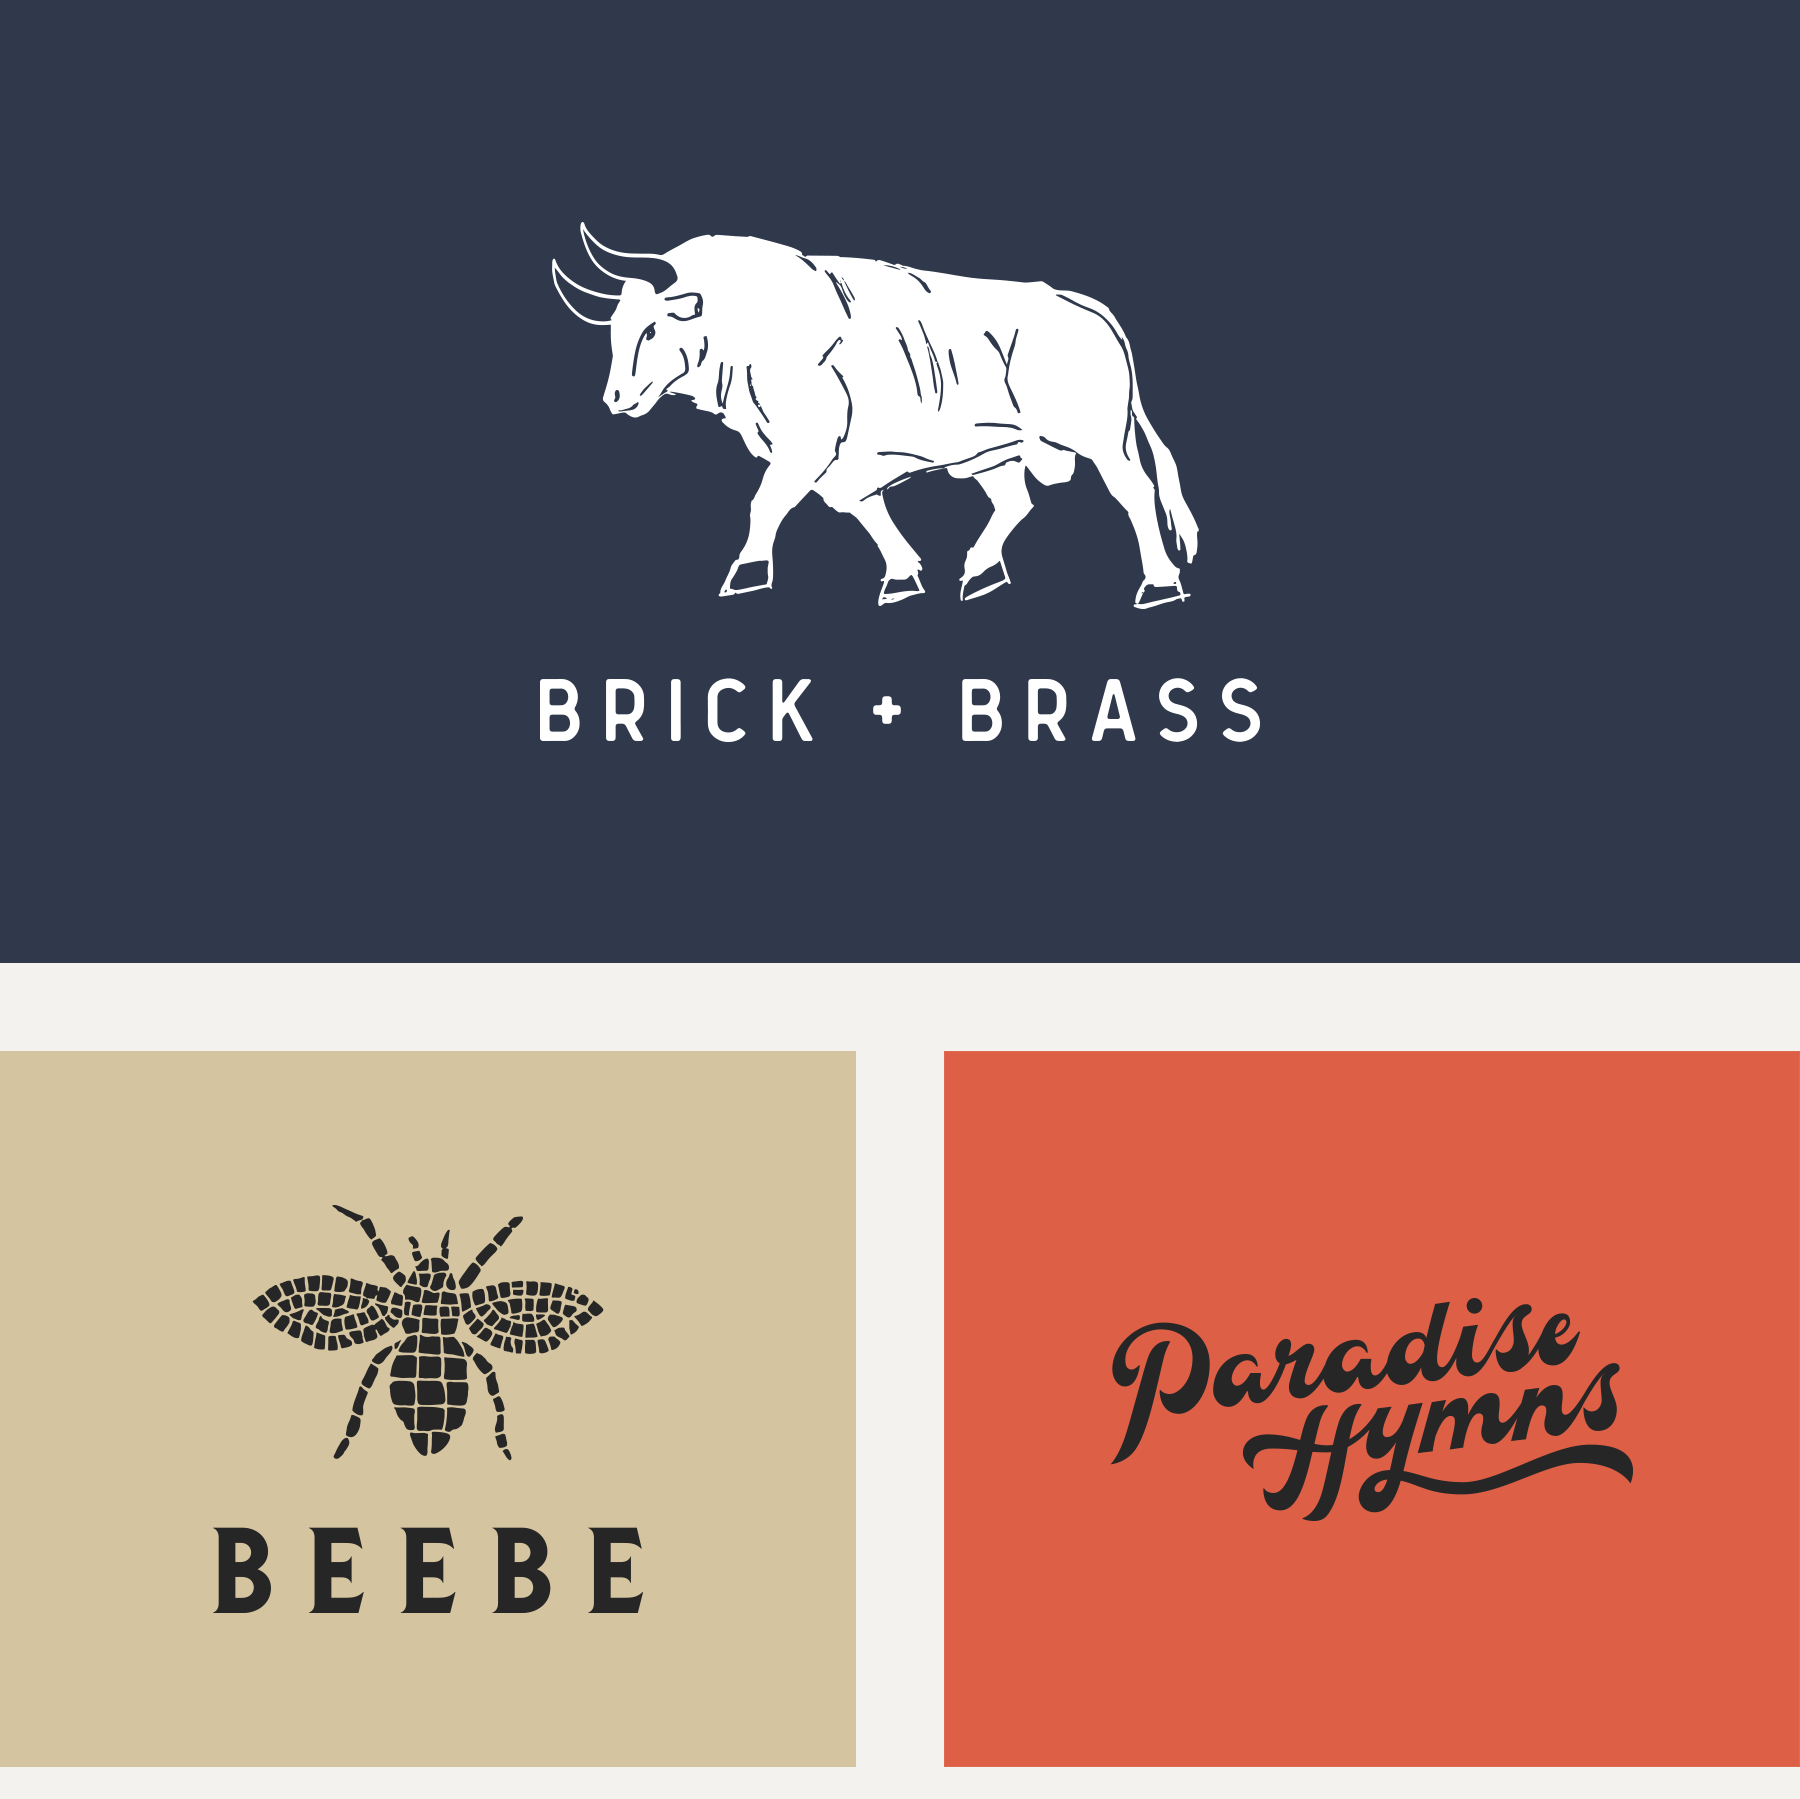 Illustrated logo design variations including Brick & Brass with a illustrated bull icon, Beebe with a mosaic bee icon, and Paradise Hymns with a heart icon.